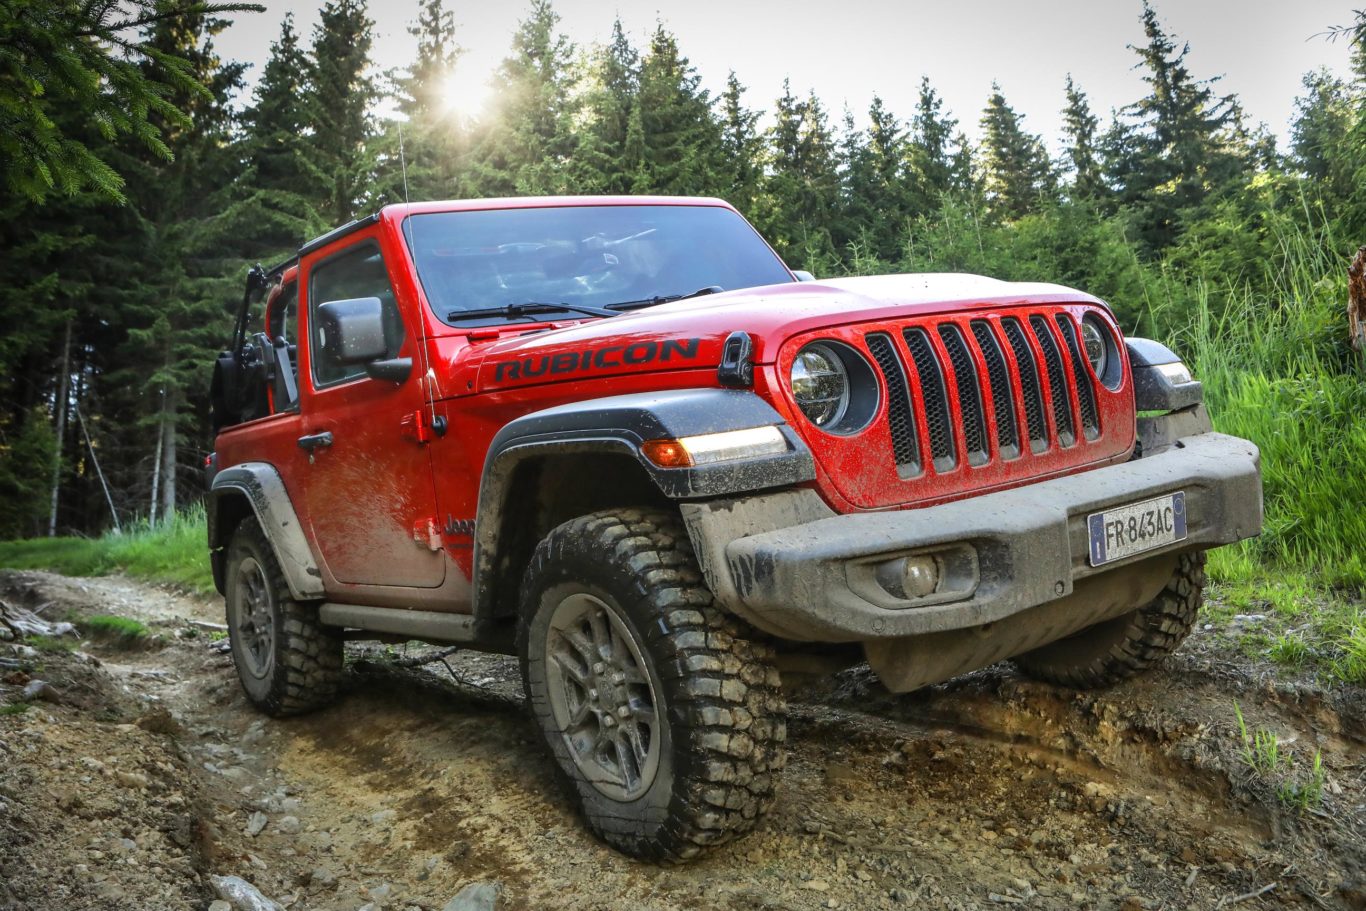 The new Jeep Wrangler has been created with off-road capability at its core